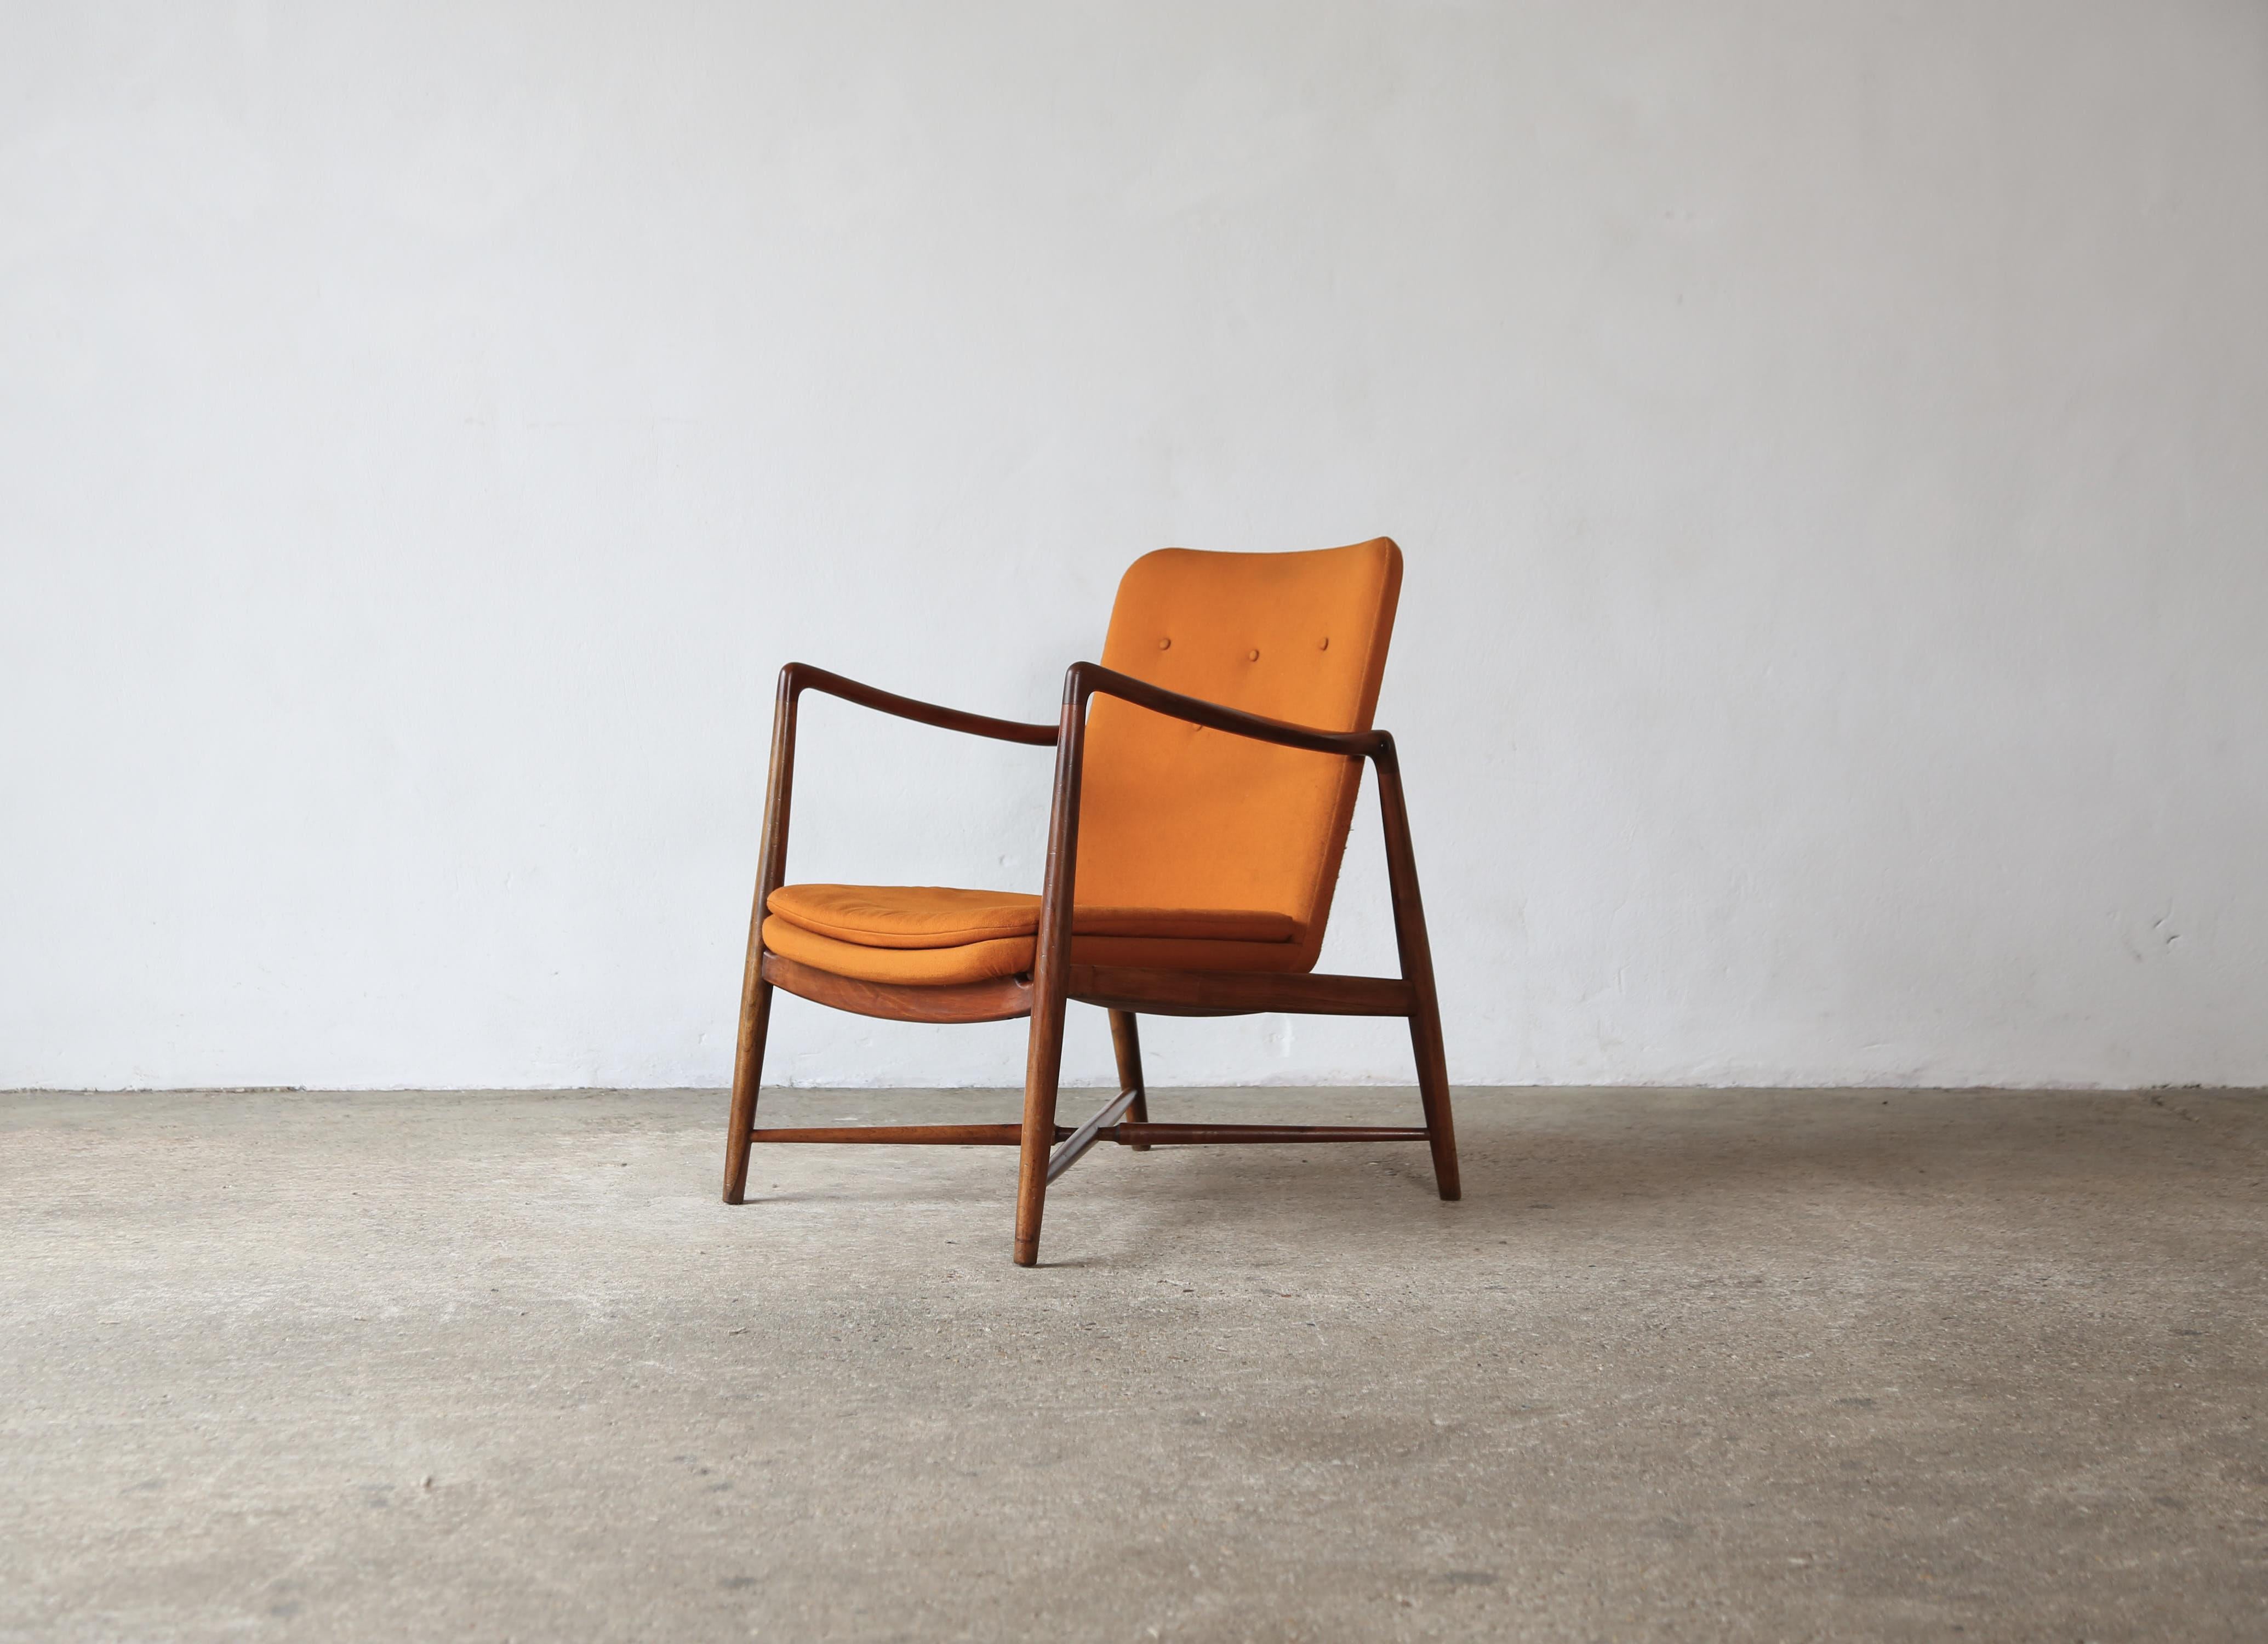 A rare Finn Juhl Fireplace Chair with original fabric.   Model BO59, produced by Bovirke in Denmark, designed 1946, and most likely manufactured in the early 1950s.   Wooden frames in very good original condition.  Original orange fabric with minor